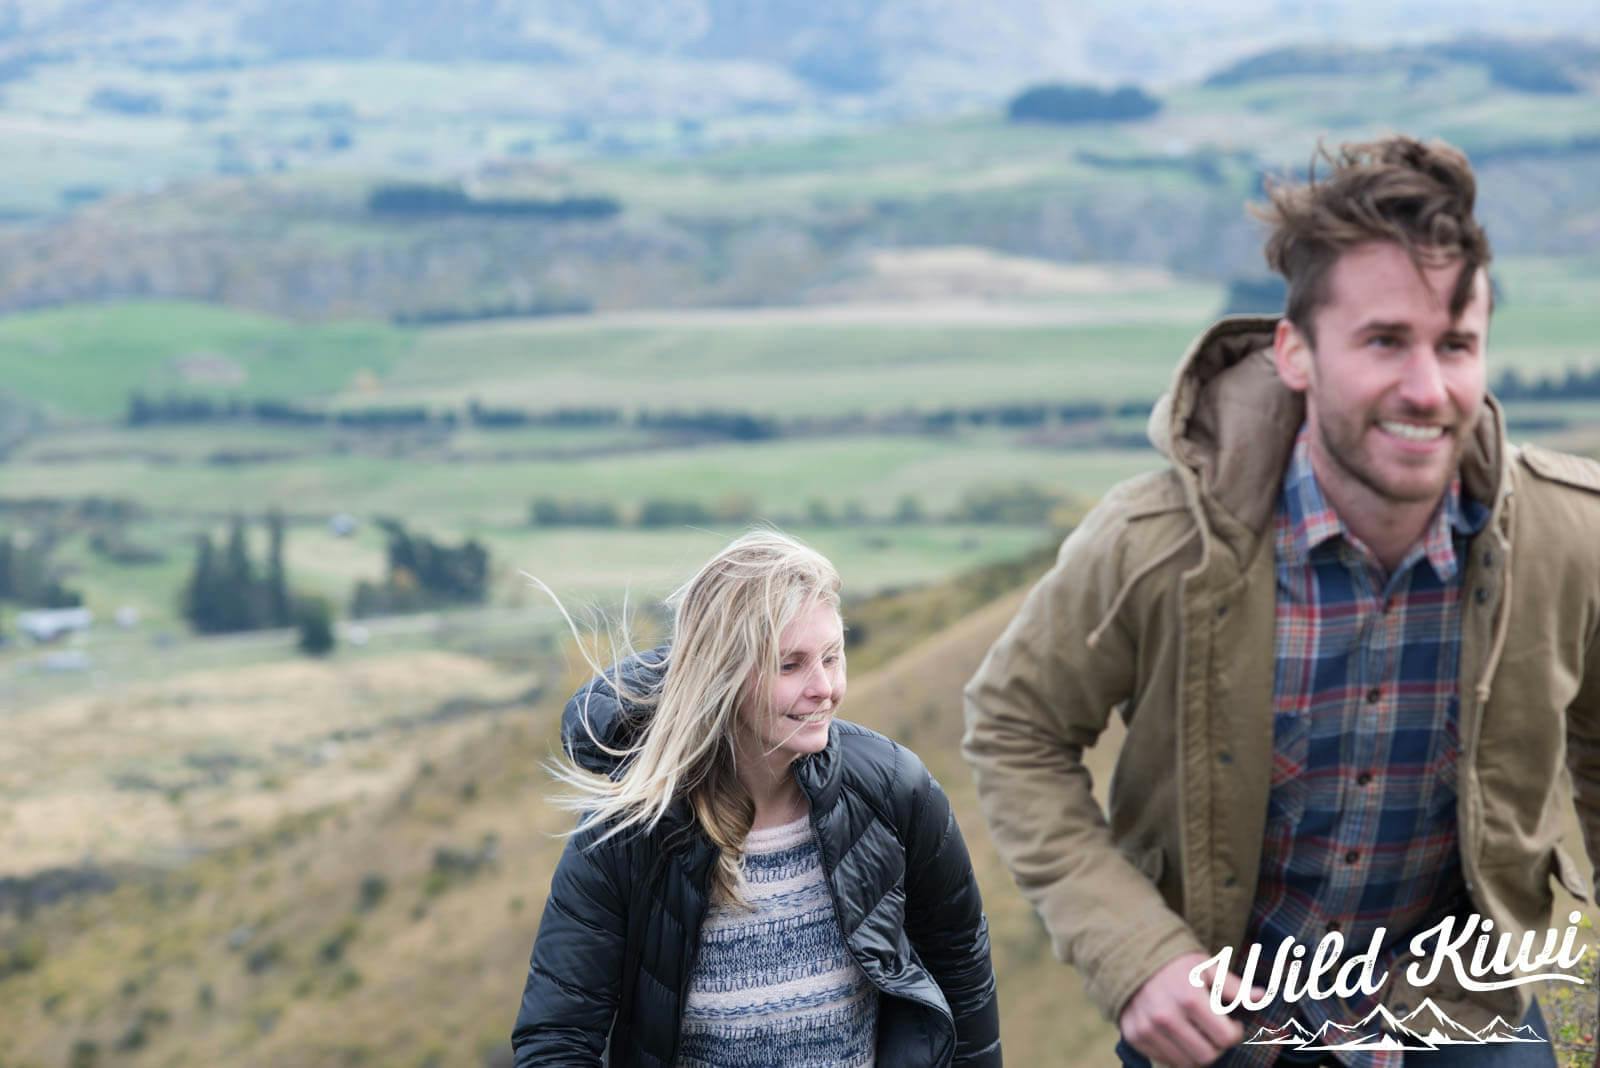 New Zealand adventures and the people who make them special - Find new friends when you travel